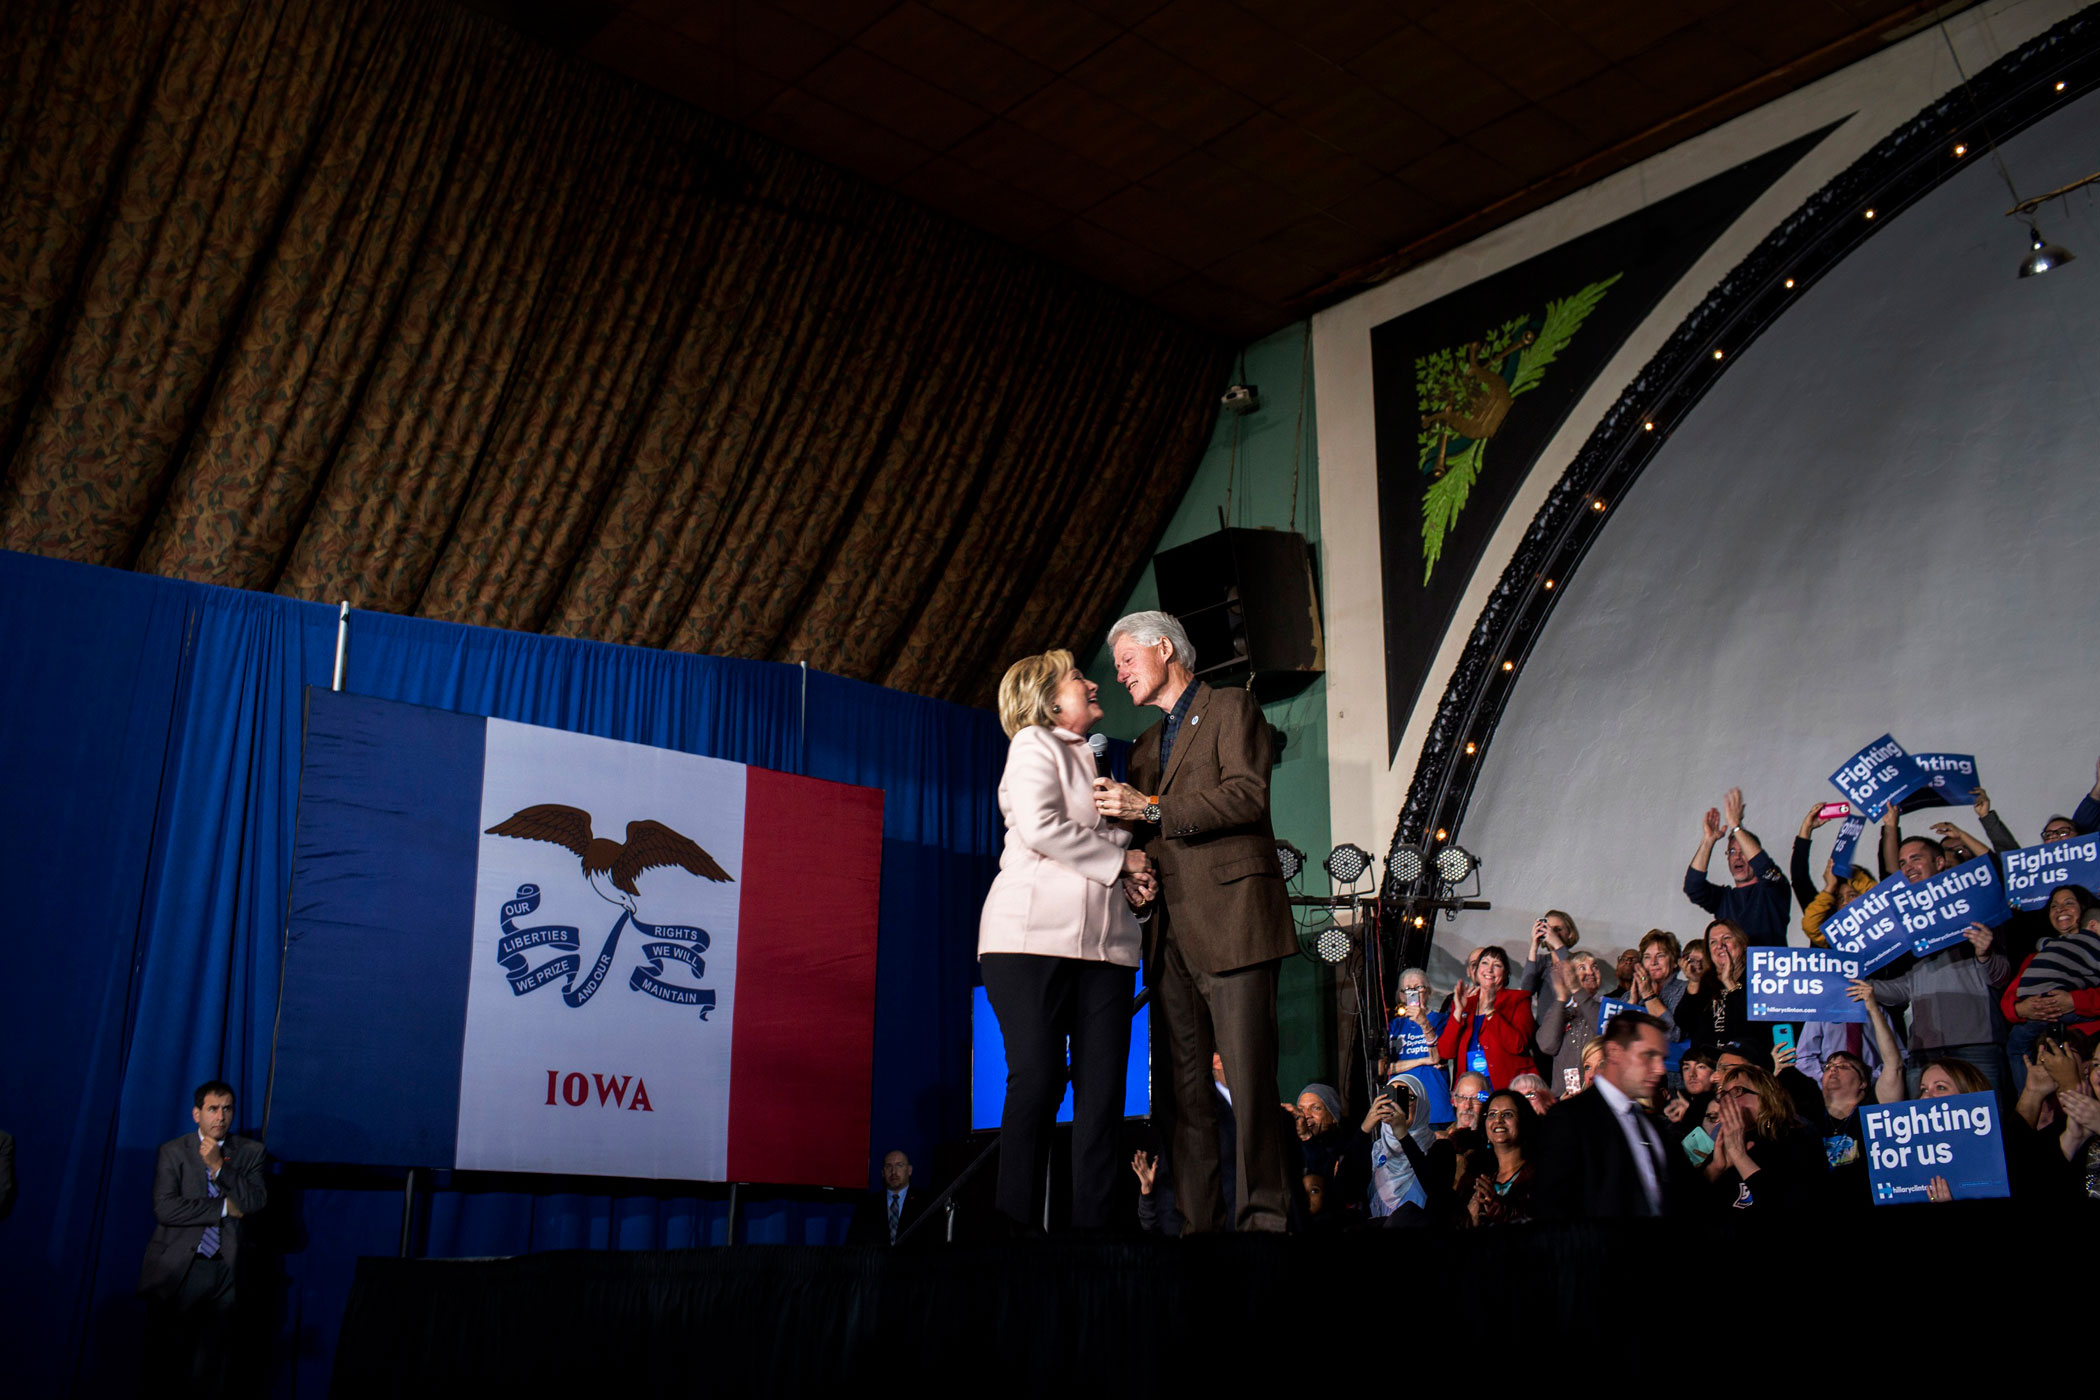 Hillary Clinton campaigns with Bill Clinton in Davenport, Iowa on Jan. 29, 2016.